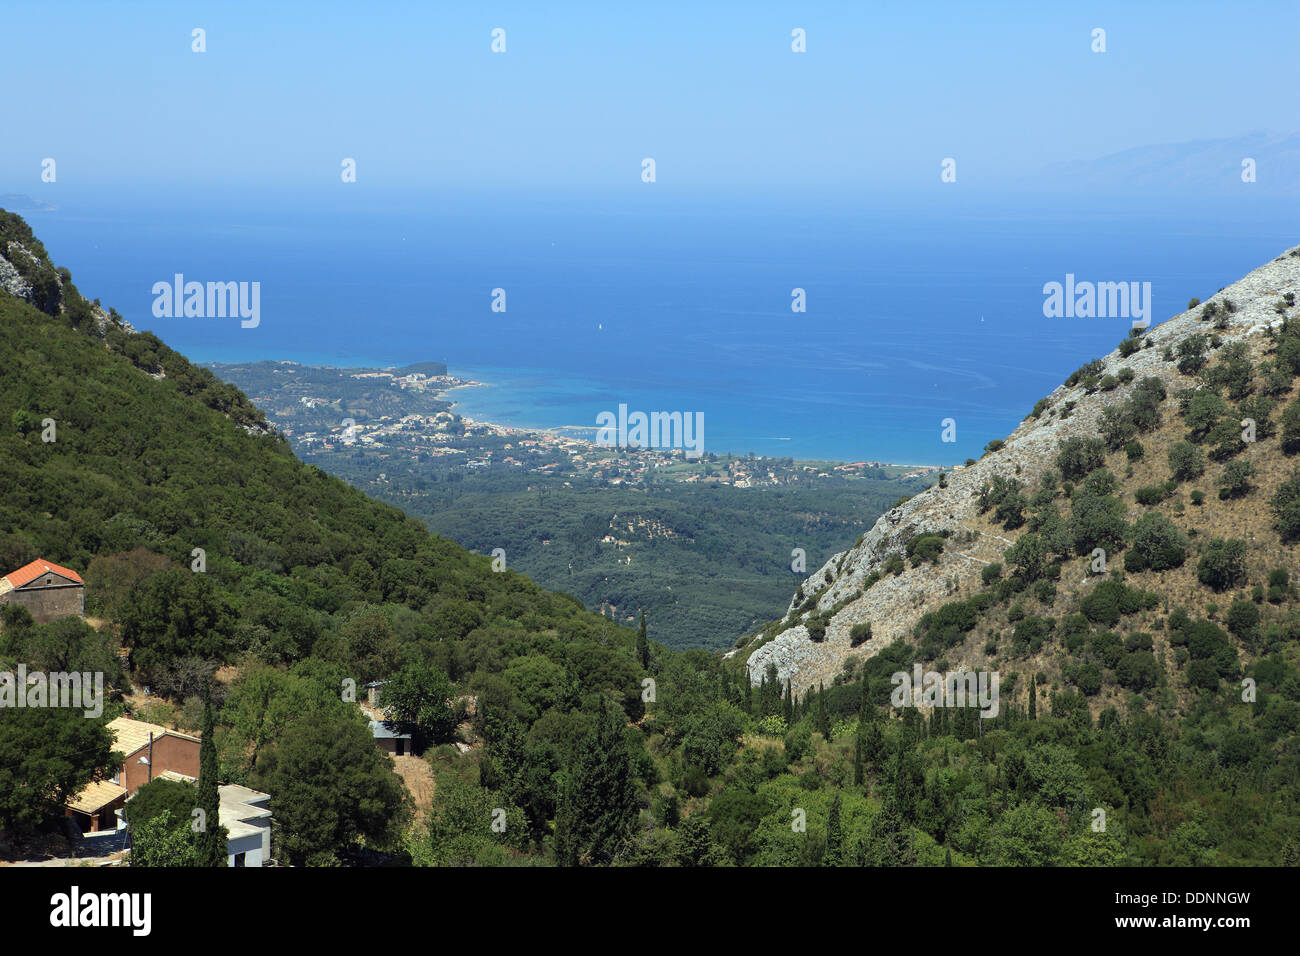 View from the slopes of Mount Pantokrator over the Corfu towns of Agnos, Roda, Ag Stafanos and Acharavi and far away,  Albania Stock Photo